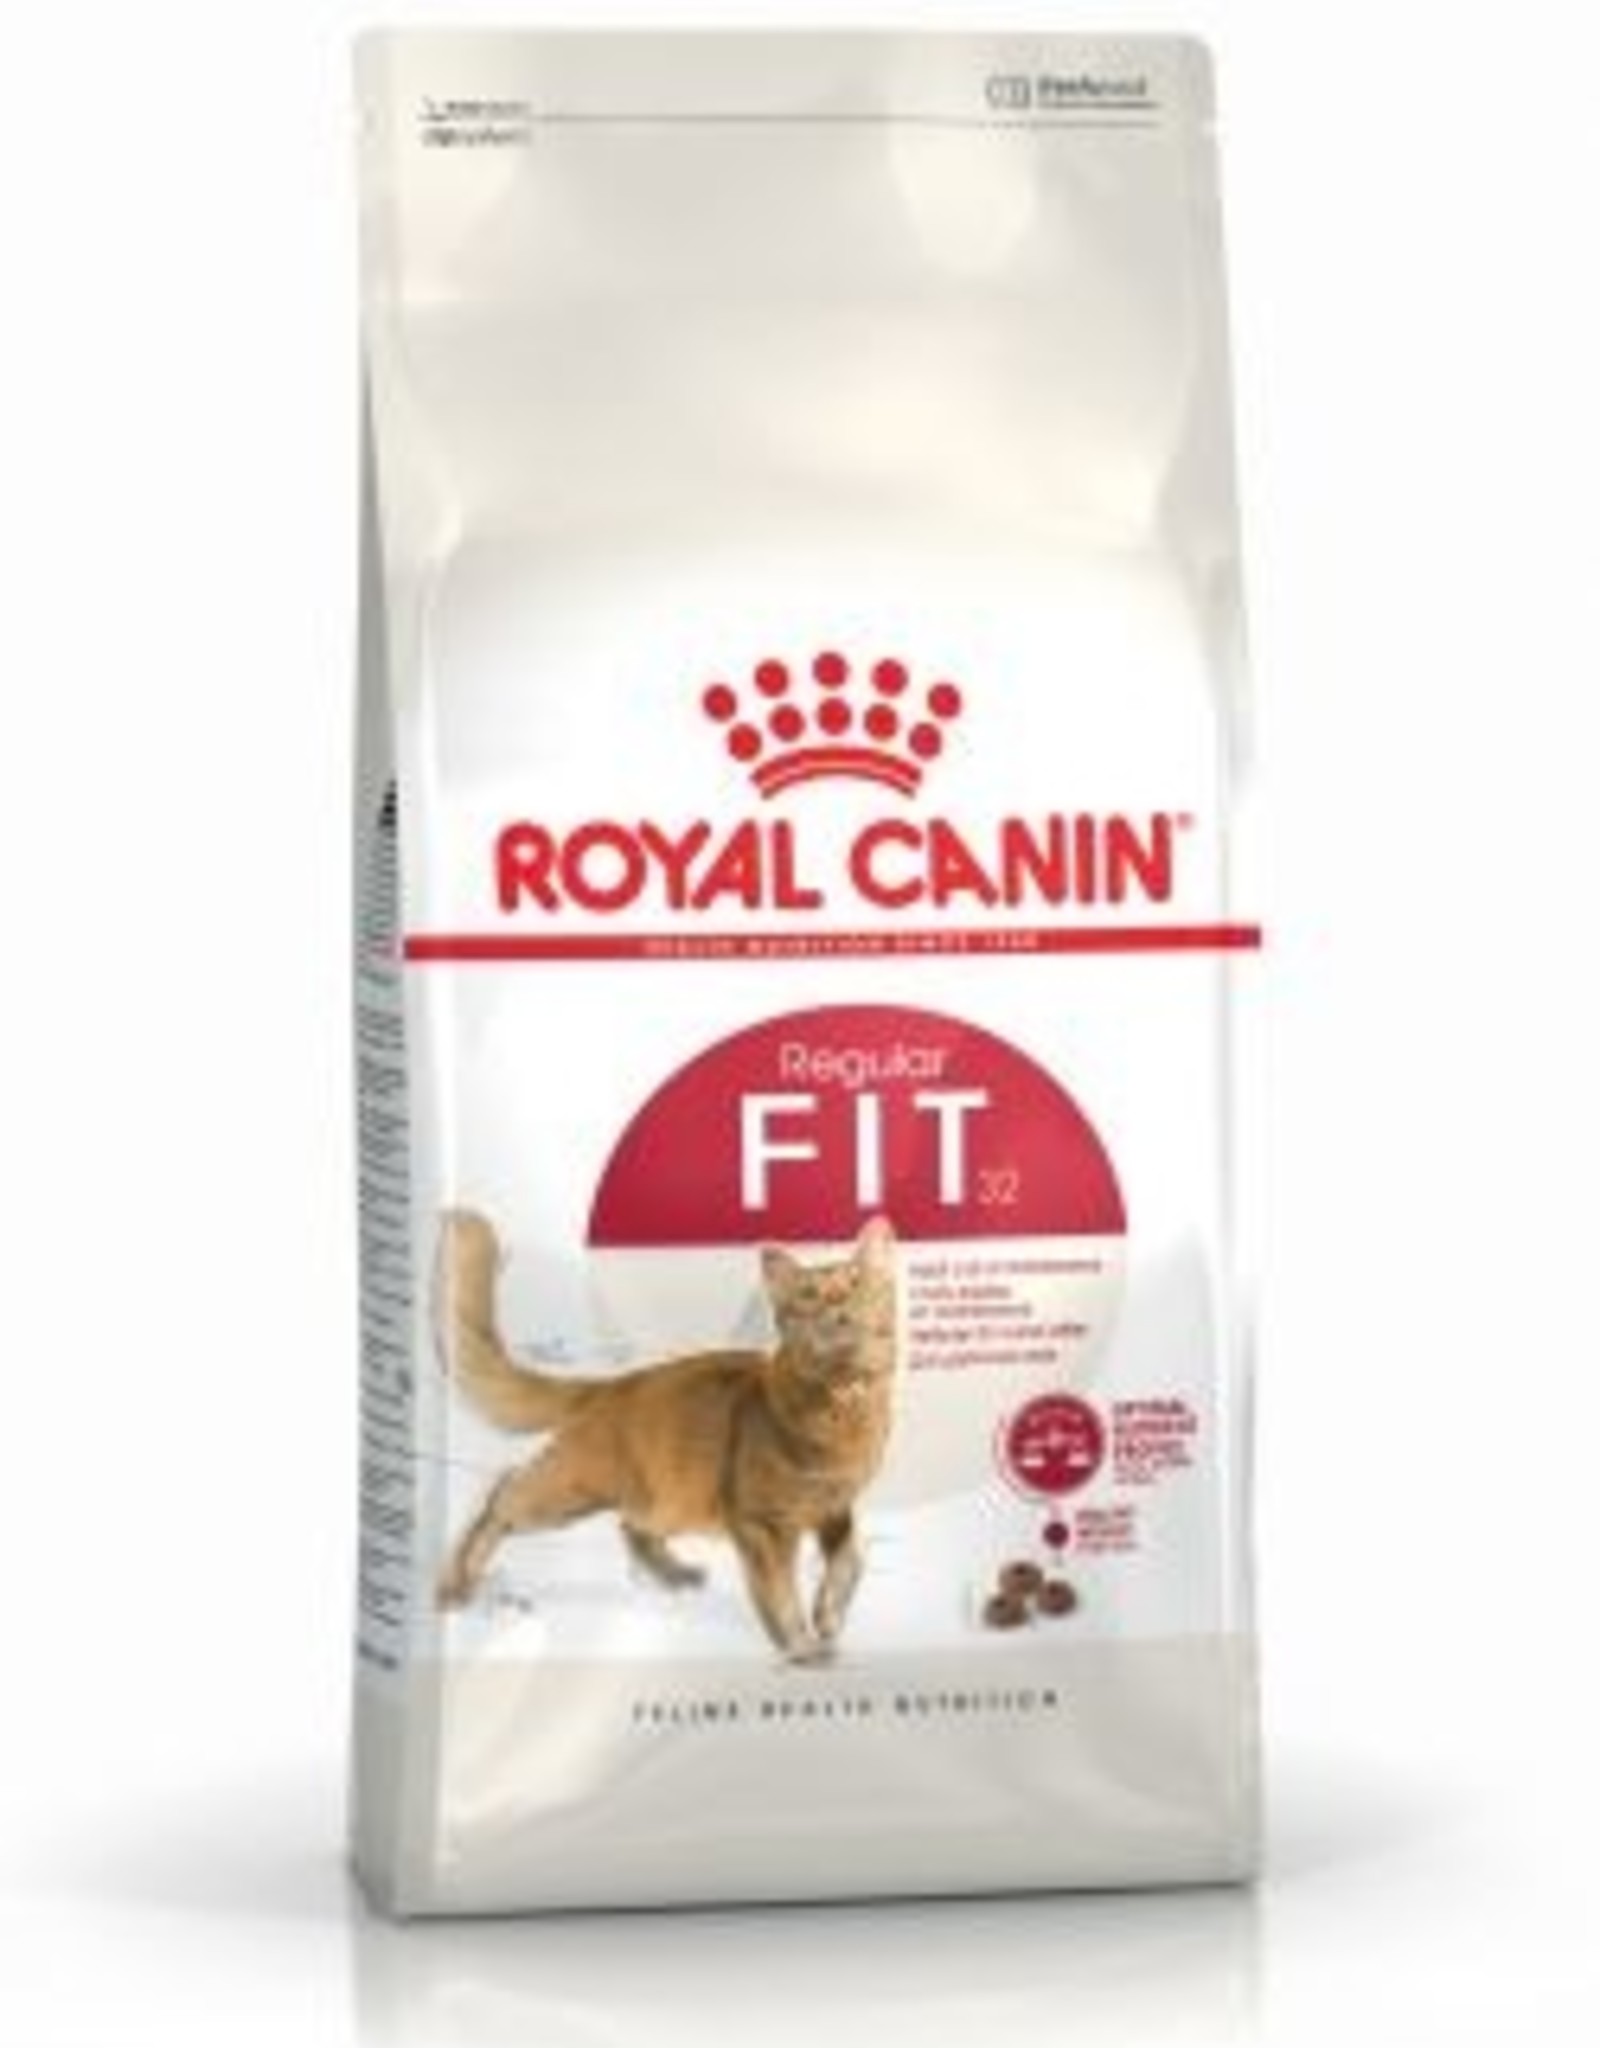 ROYAL CANIN ROYAL CANIN CAT ADULT FIT 32% 7LBS